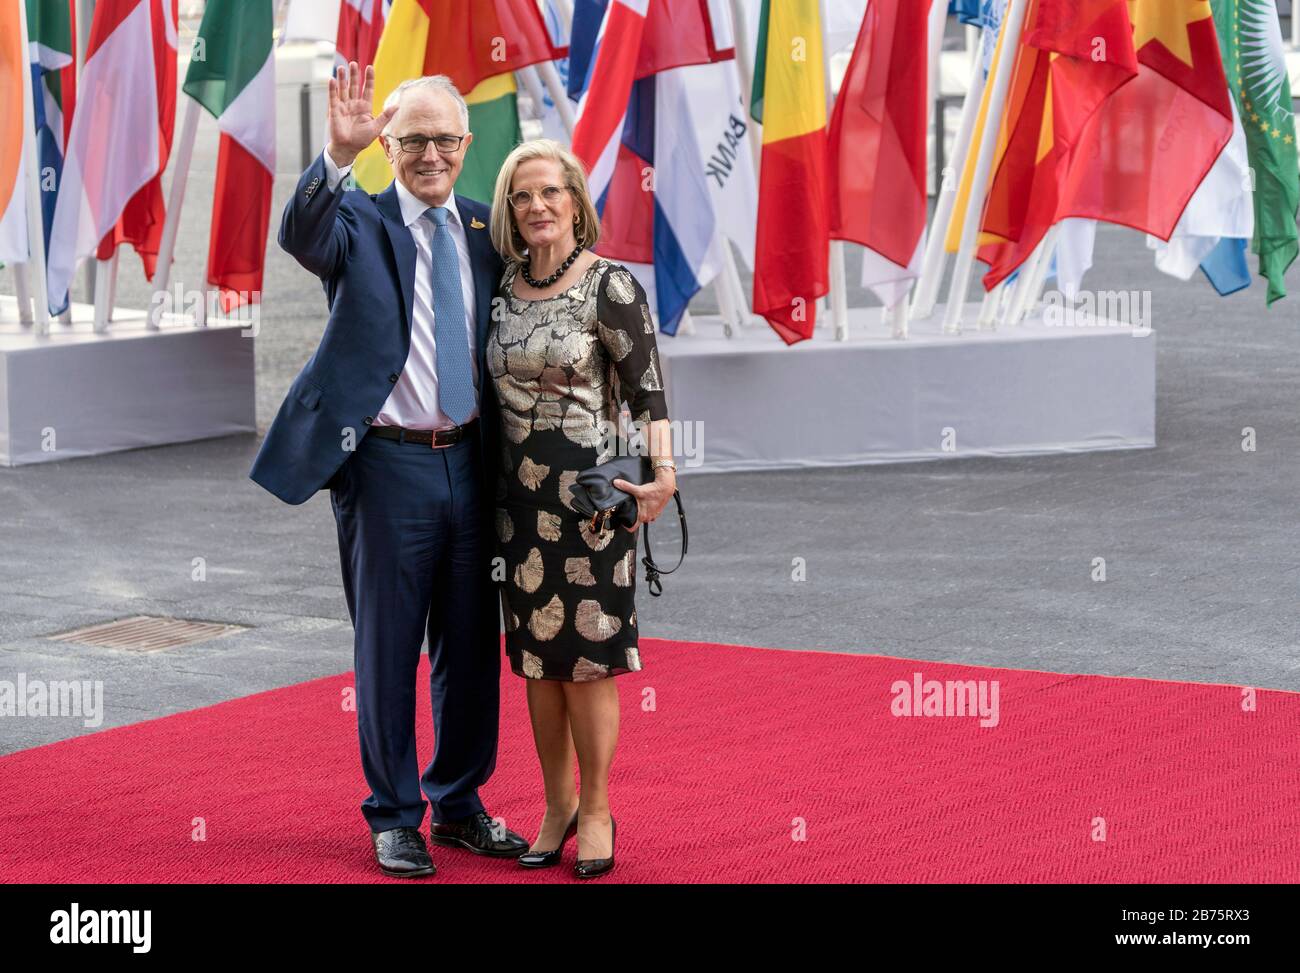 Germany, Hamburg, 07.07.2017. G-20 summit in Hamburg on 07.07.2017. Arrival of the heads of government at the Elb-Philharmonie on 07.07.2017. Malcolm Turnbull (left), Prime Minister of Australia and Lucy Turnbull, First Lady. [automated translation] Stock Photo